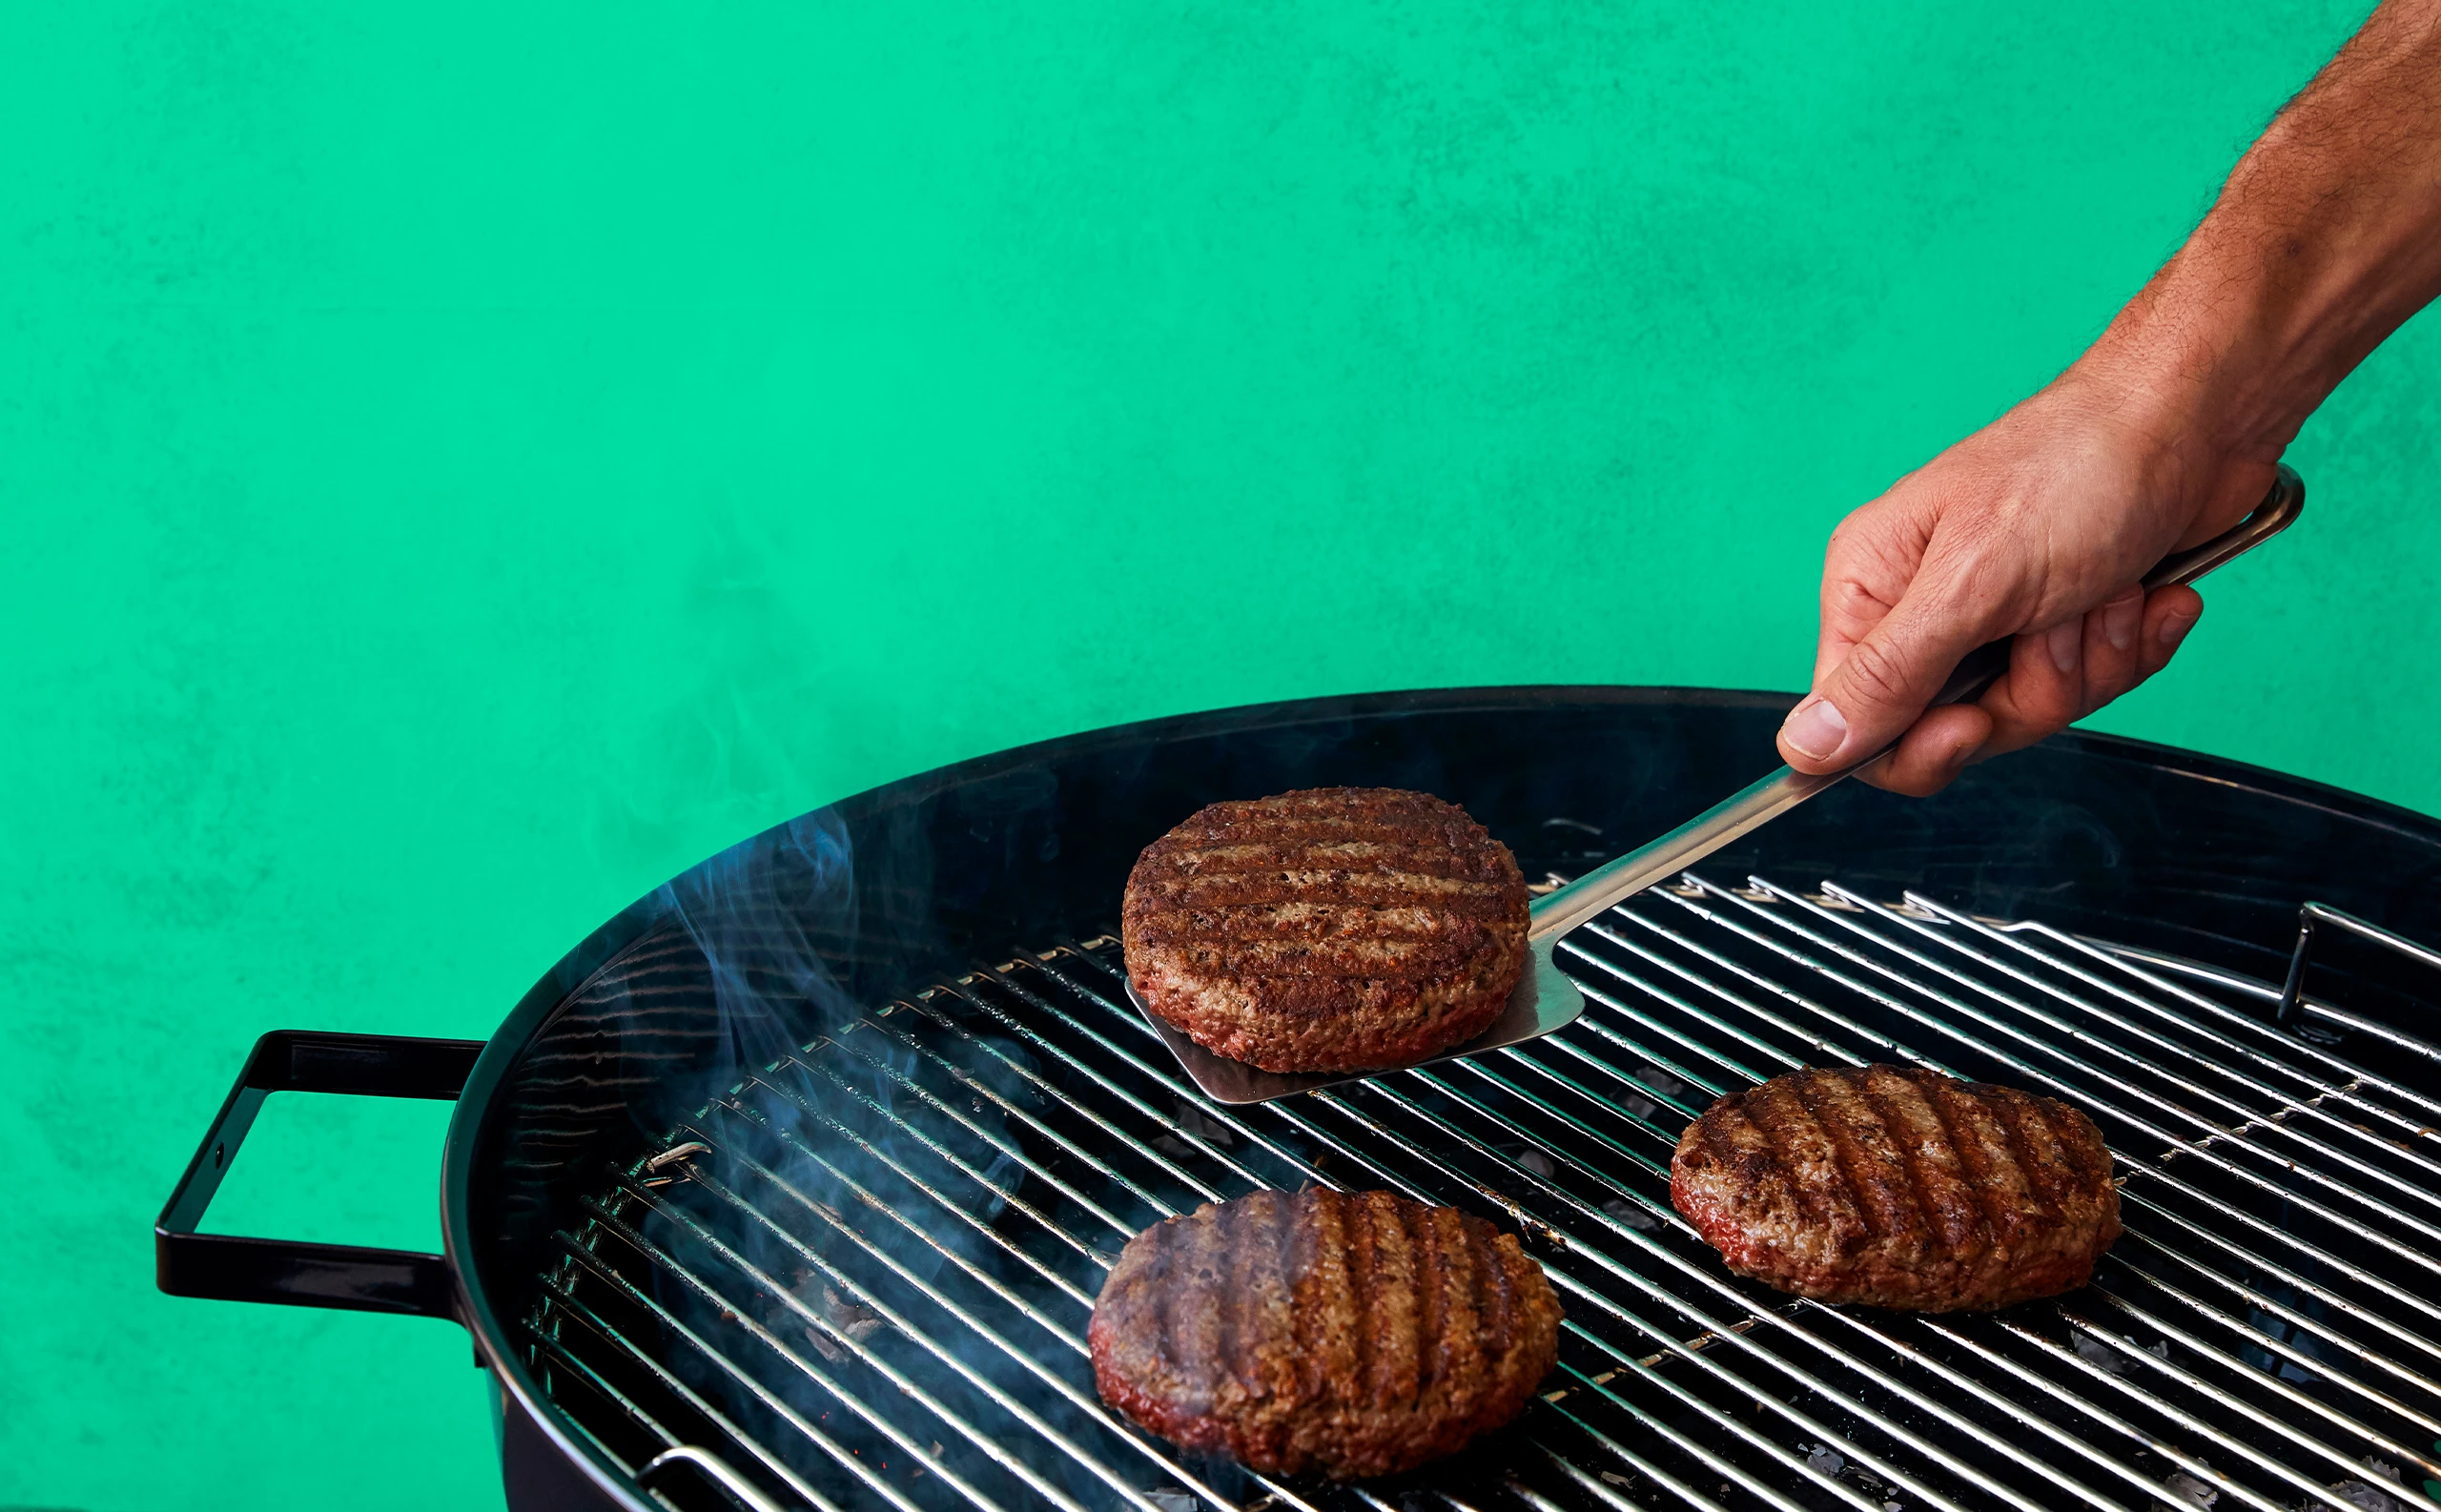 How to grill burgers on a propane grill for summer barbecues